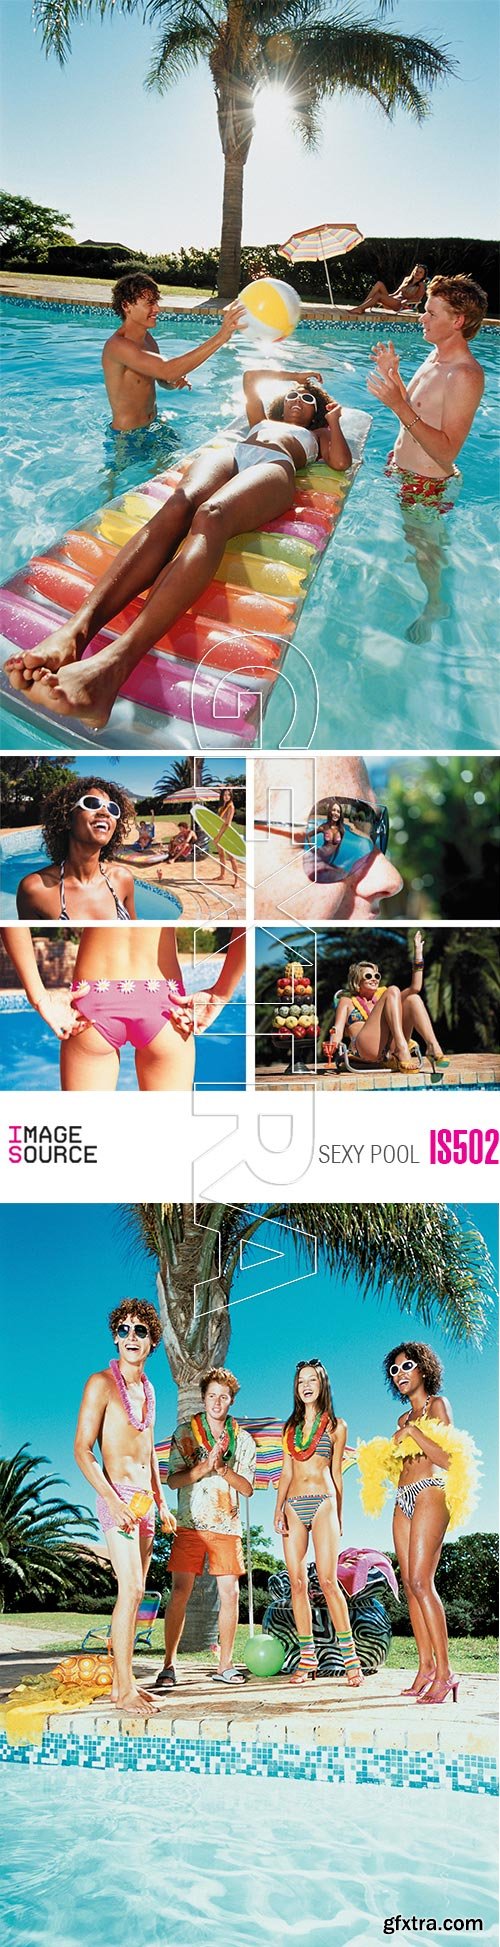 Image Source IS502 Sexy Pool